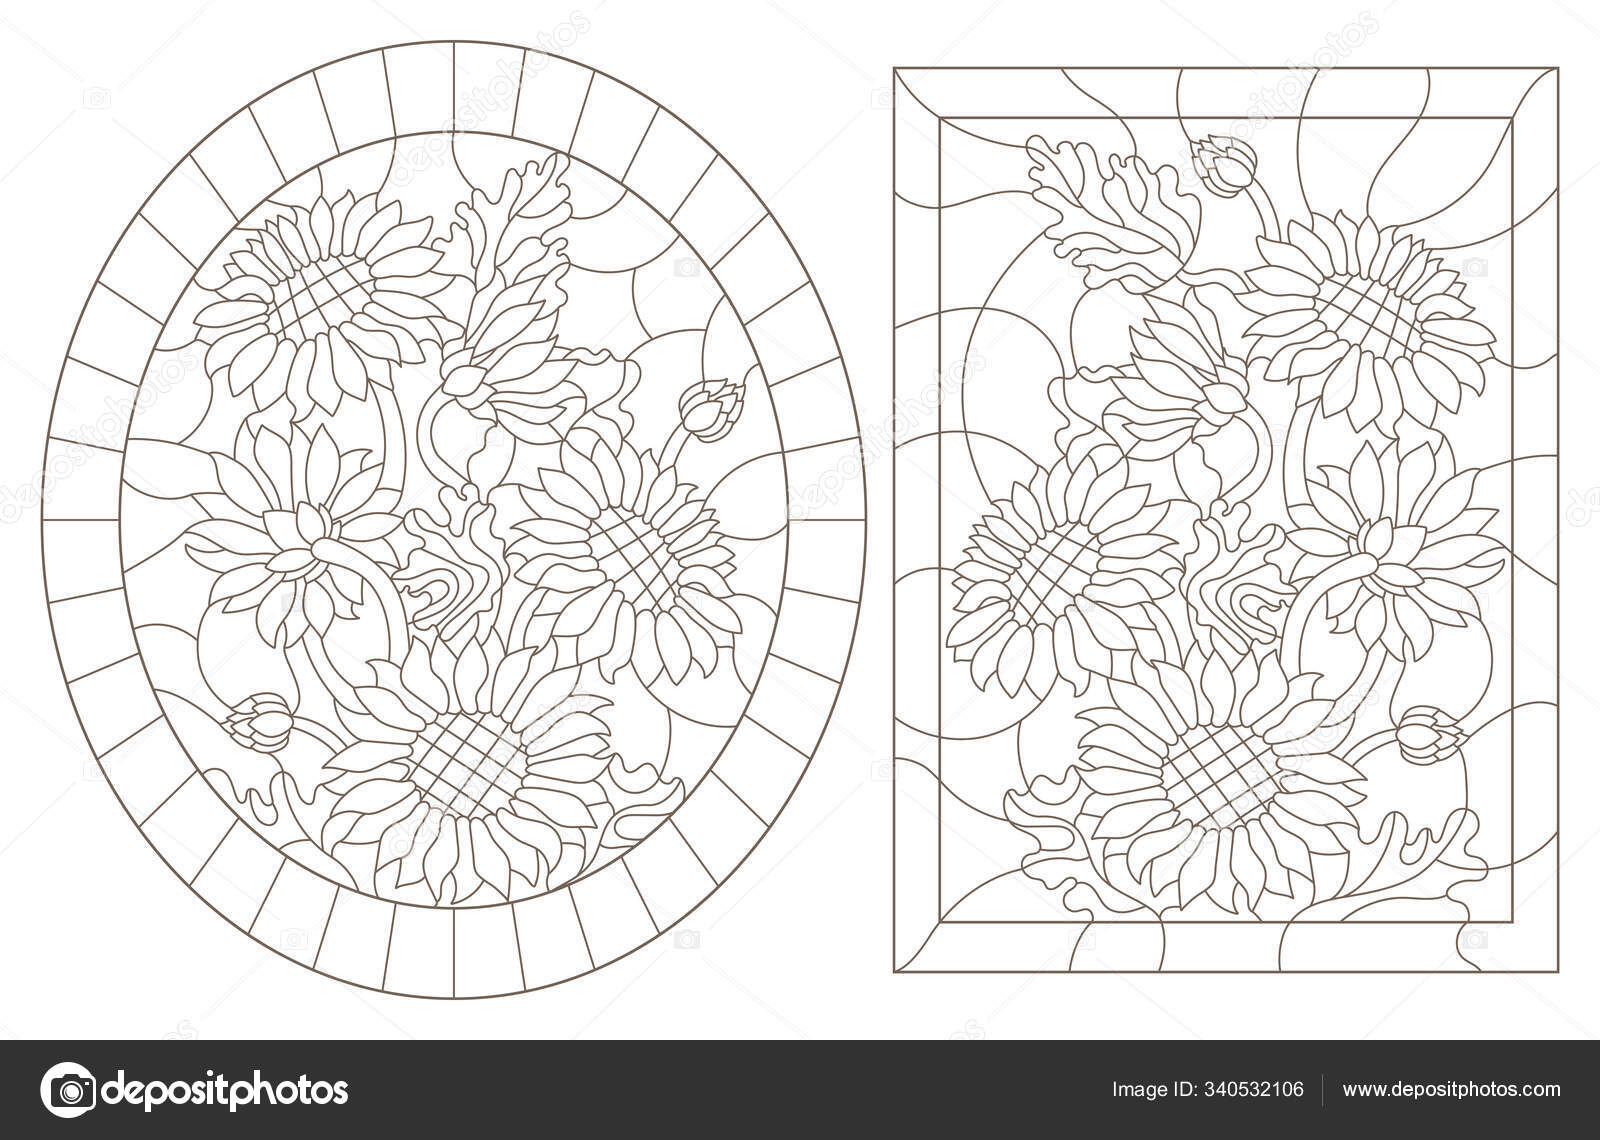 A set of contour illustrations of stained glass windows with sunflowers in frames dark contours on a white background oval and rectangular image stock vector by zagory